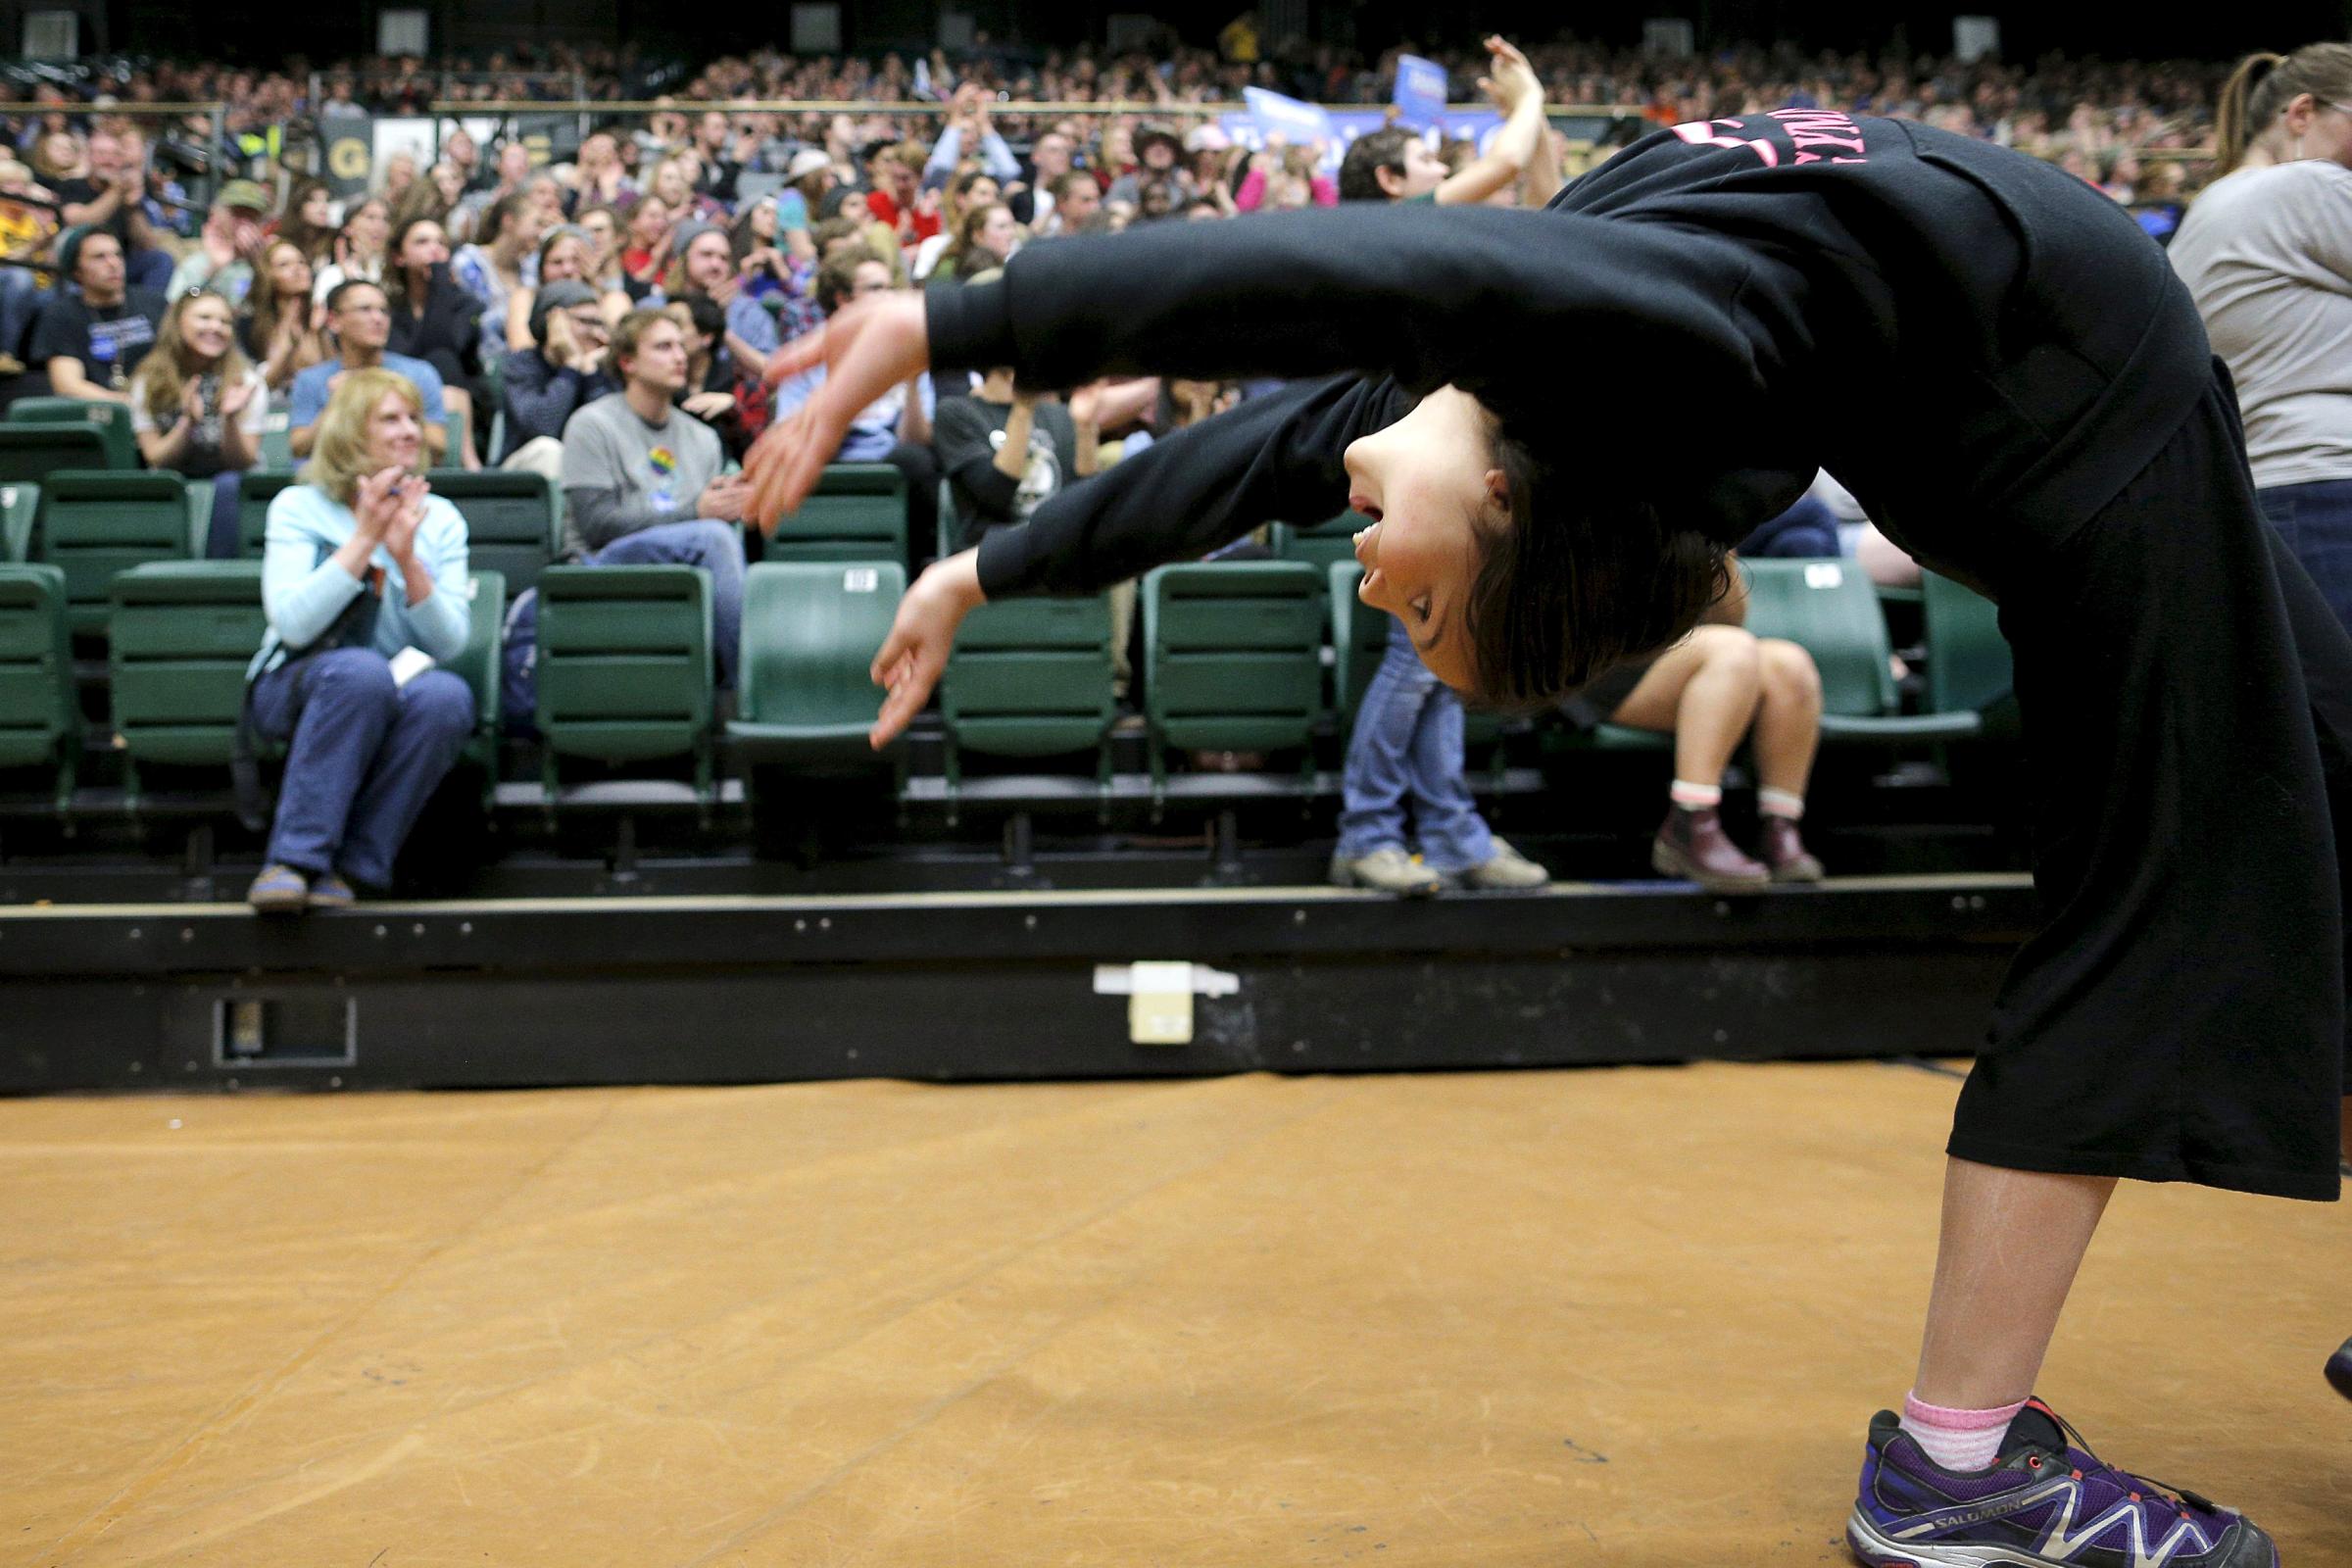 A girl does a backflip during a campaign rally for Democratic presidential candidate, Vermont Sen. Bernie Sanders in Fort Collins, Colo. on Feb. 28.